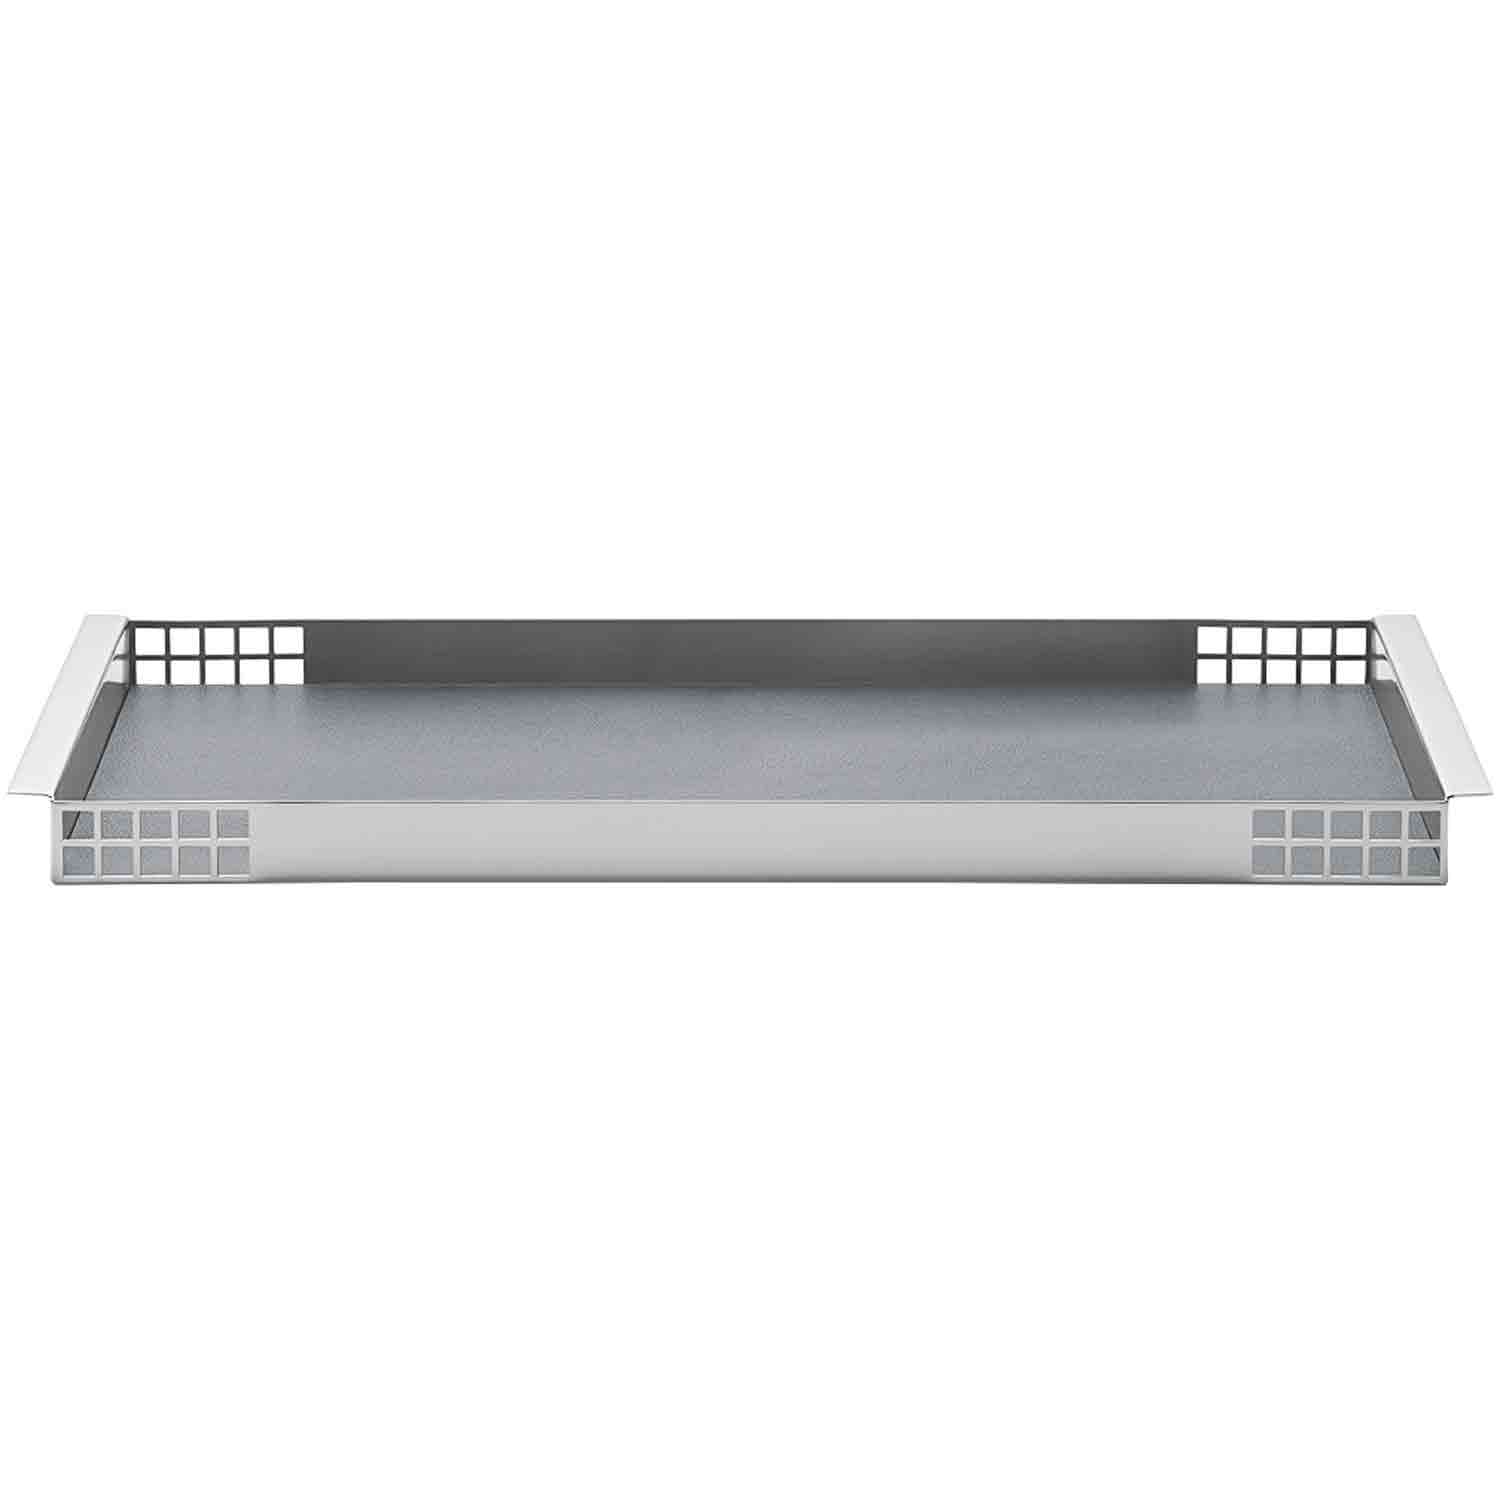 Matrix Tray Stainless Steel/Leather